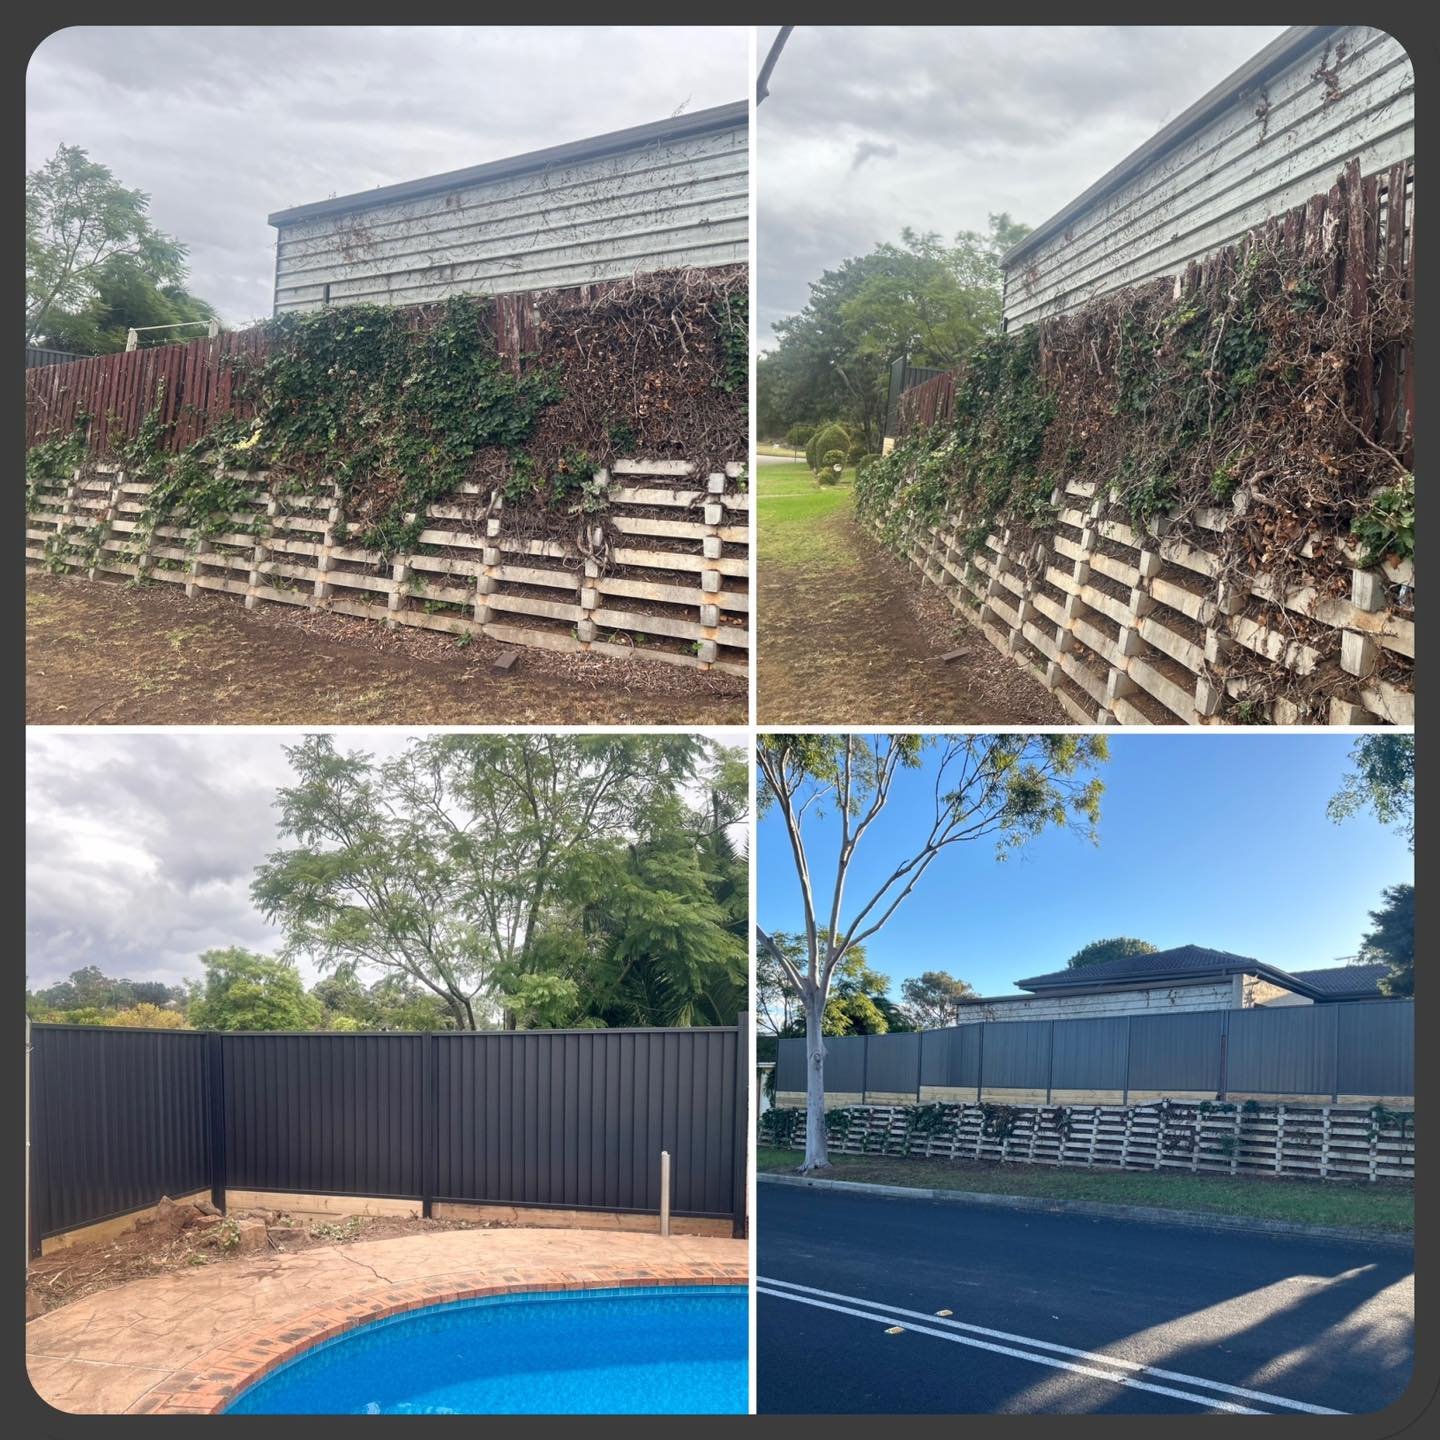 Finished off a complete boundary fence replacement for a lovely client in Bradbury. We also added a new filter surround for pool compliance. Check out the before and after.  #gardenfencing #glasspoolfencing #glasspoolfencing #colourbondsteel #colourb